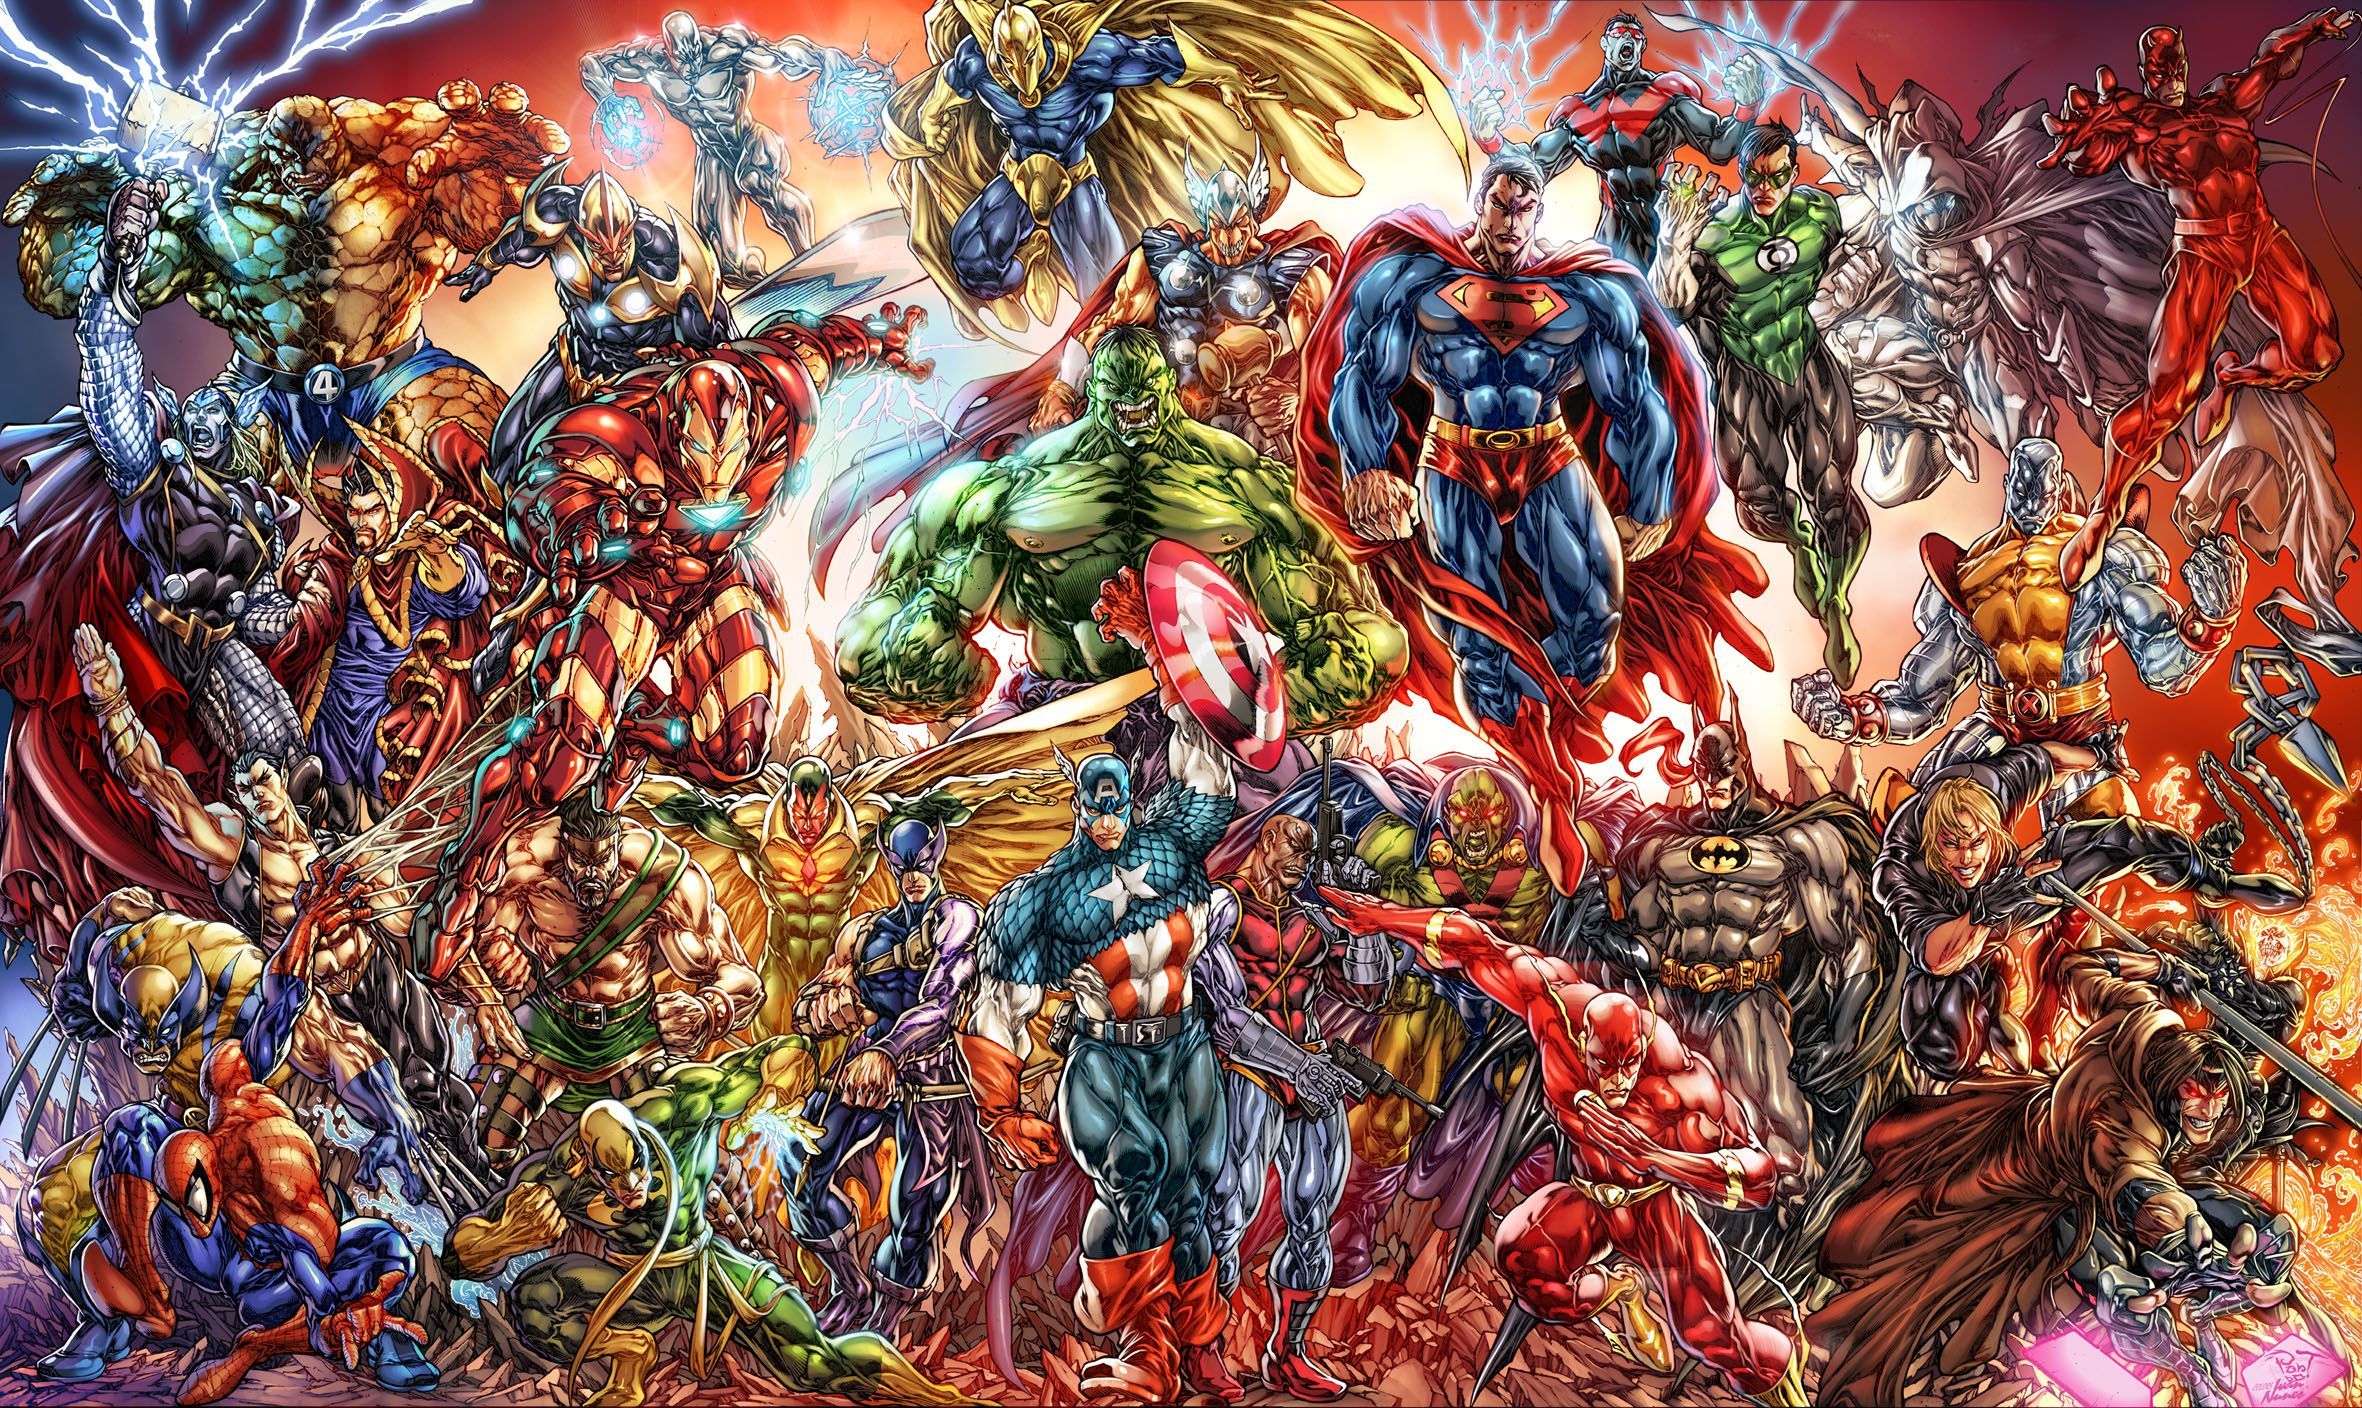 Of Marvel And DC Characters Computer Wallpaper, Desktop Background. Marvel and dc characters, Marvel wallpaper, Dc comics wallpaper